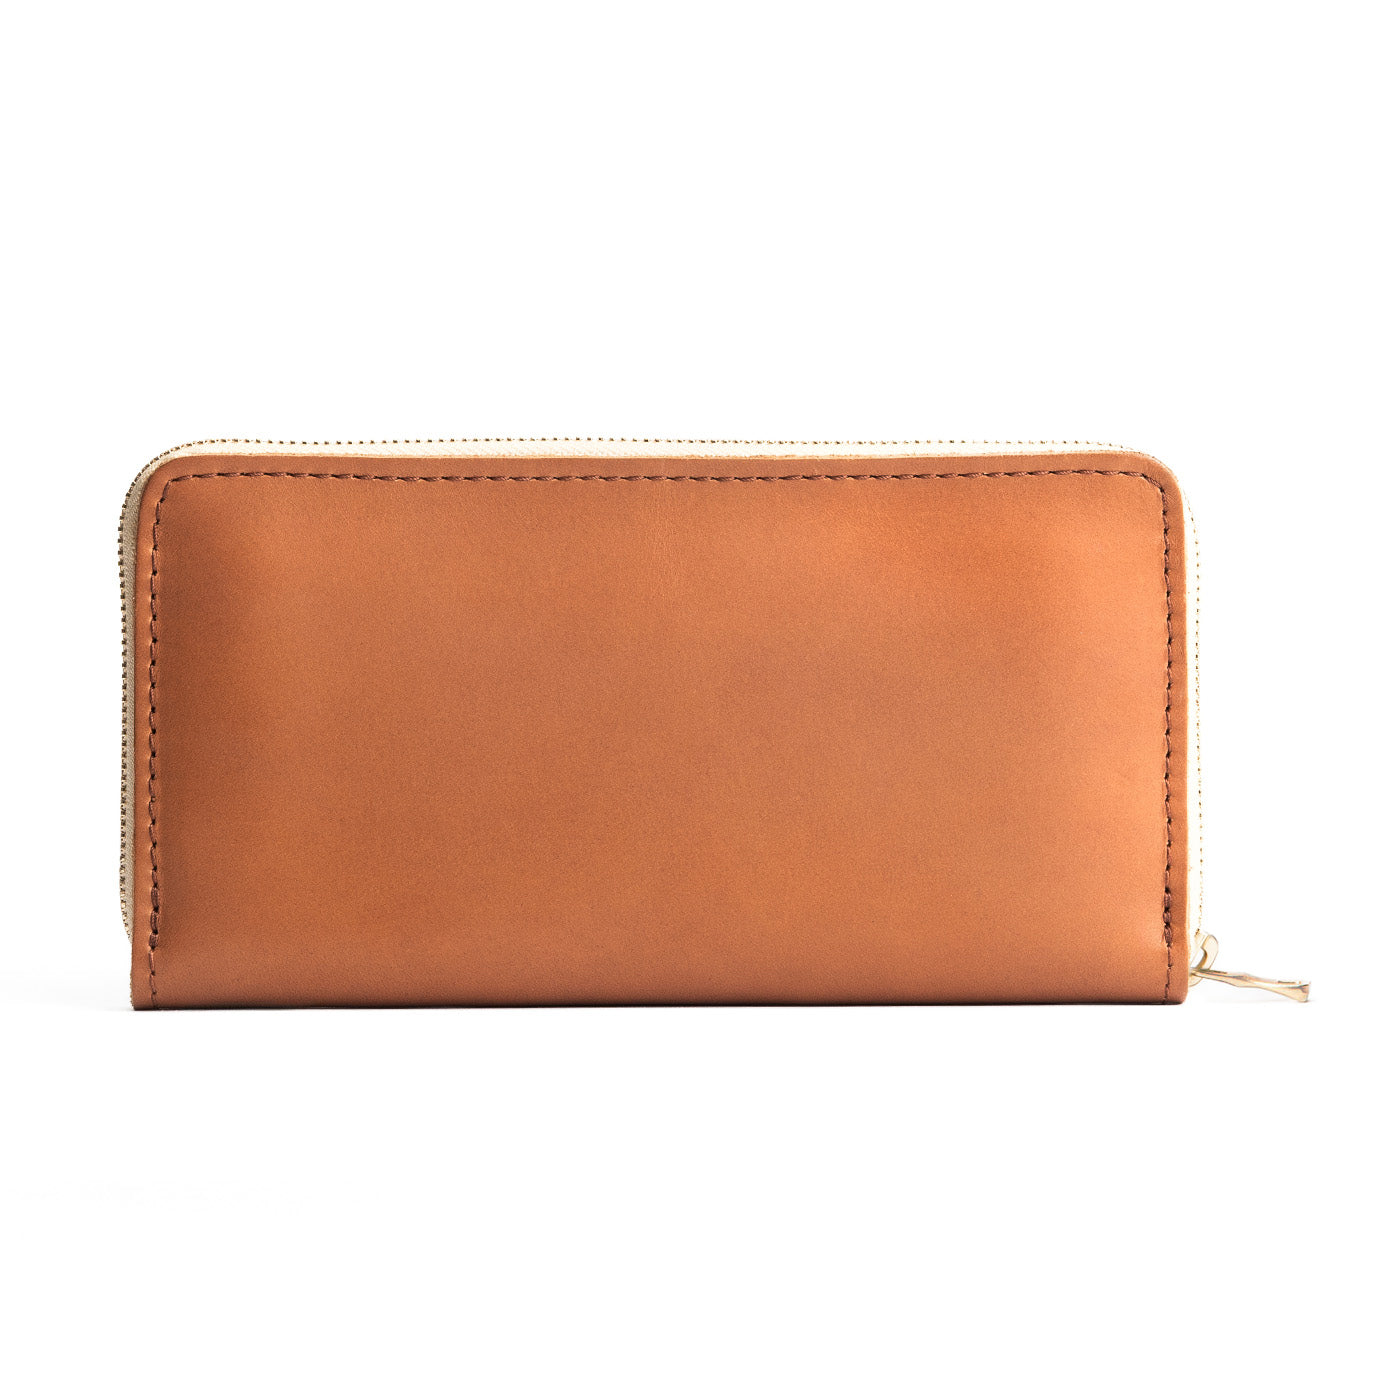 All Color: Biscuit | leather handmade wallet